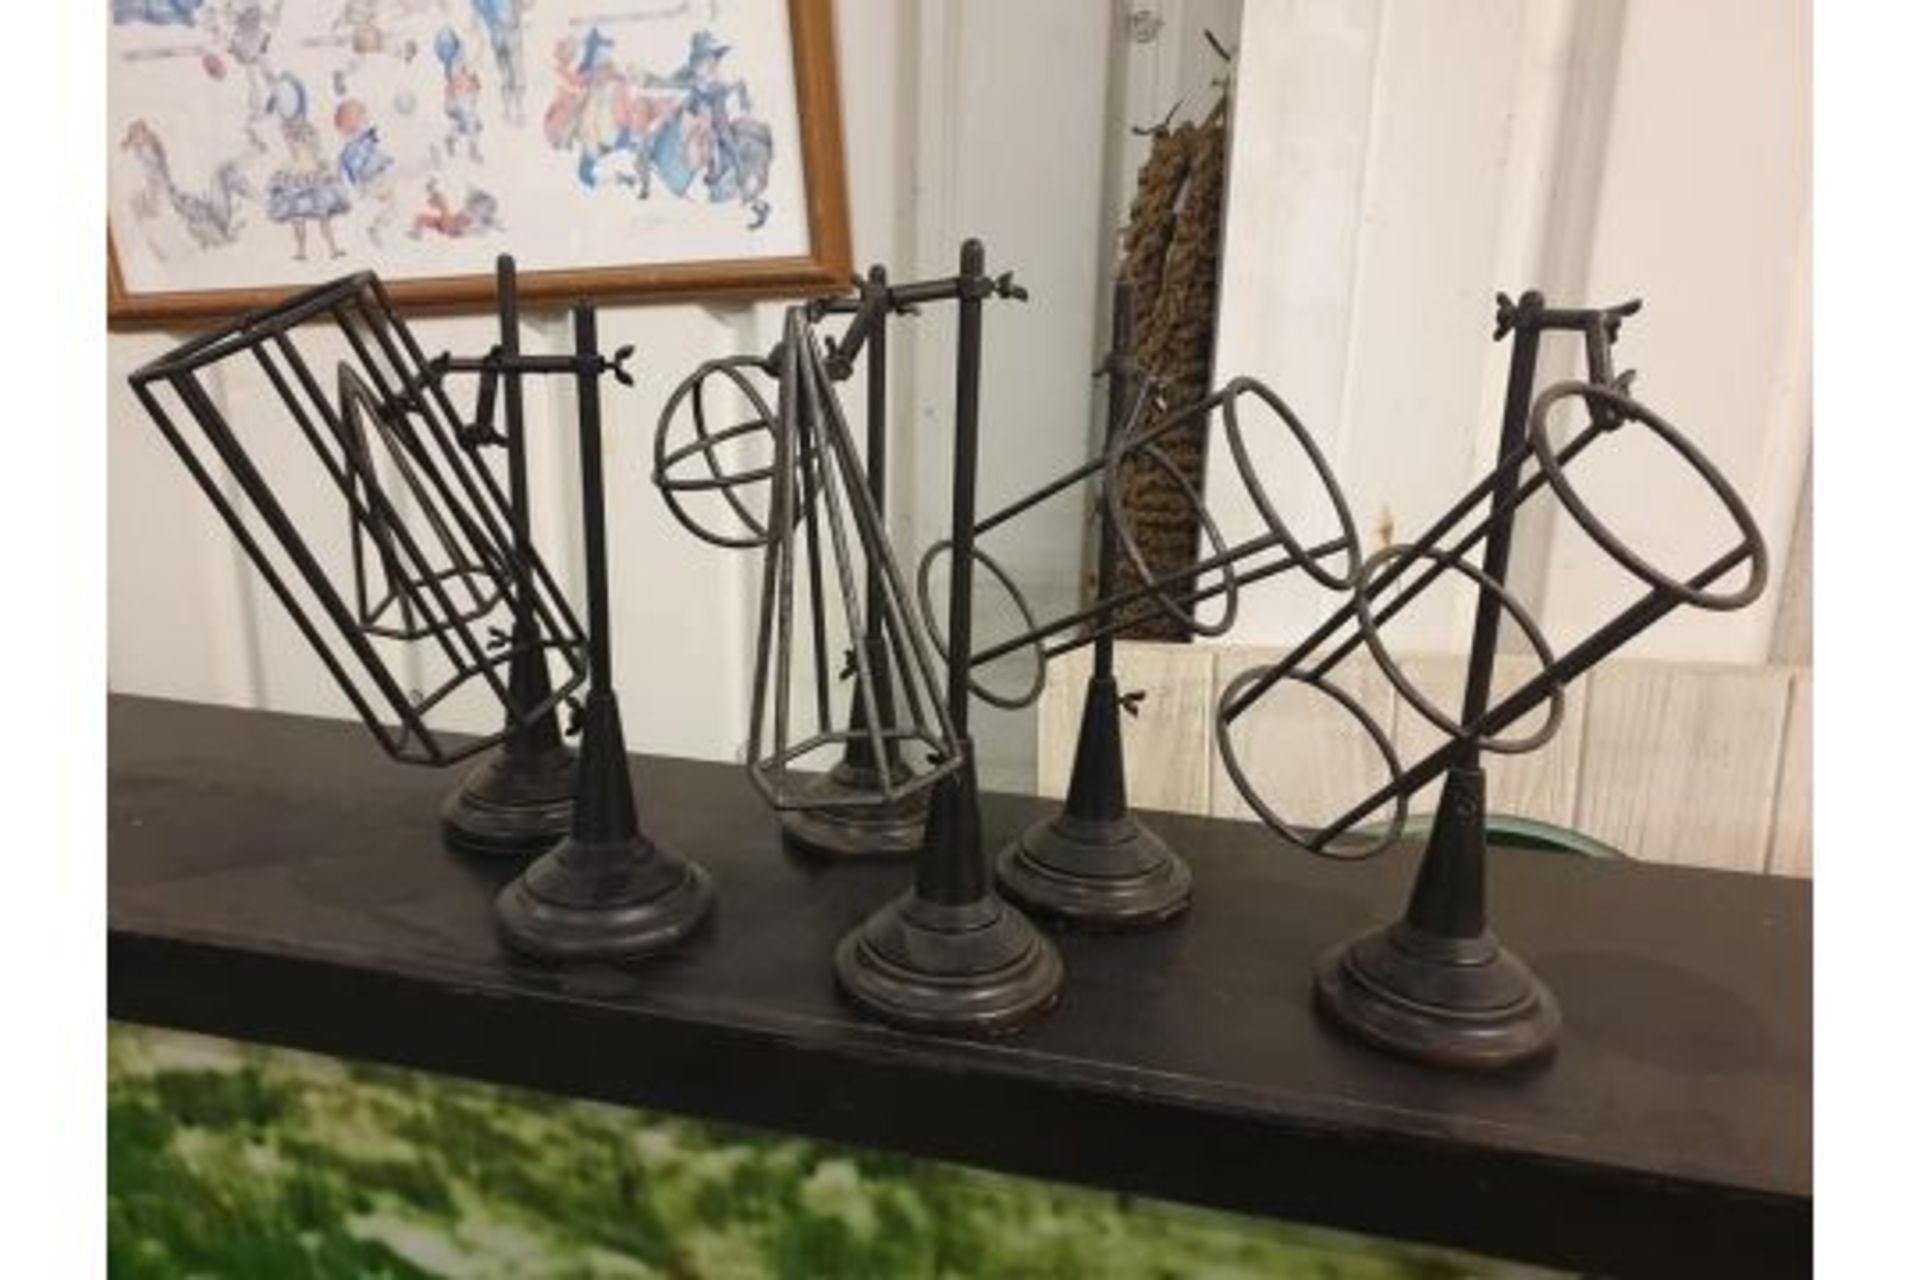 3 x Geometric Euclid Shapes The Father Of Geometry Geometric Decorative Metal Iron Sculptures 33cm